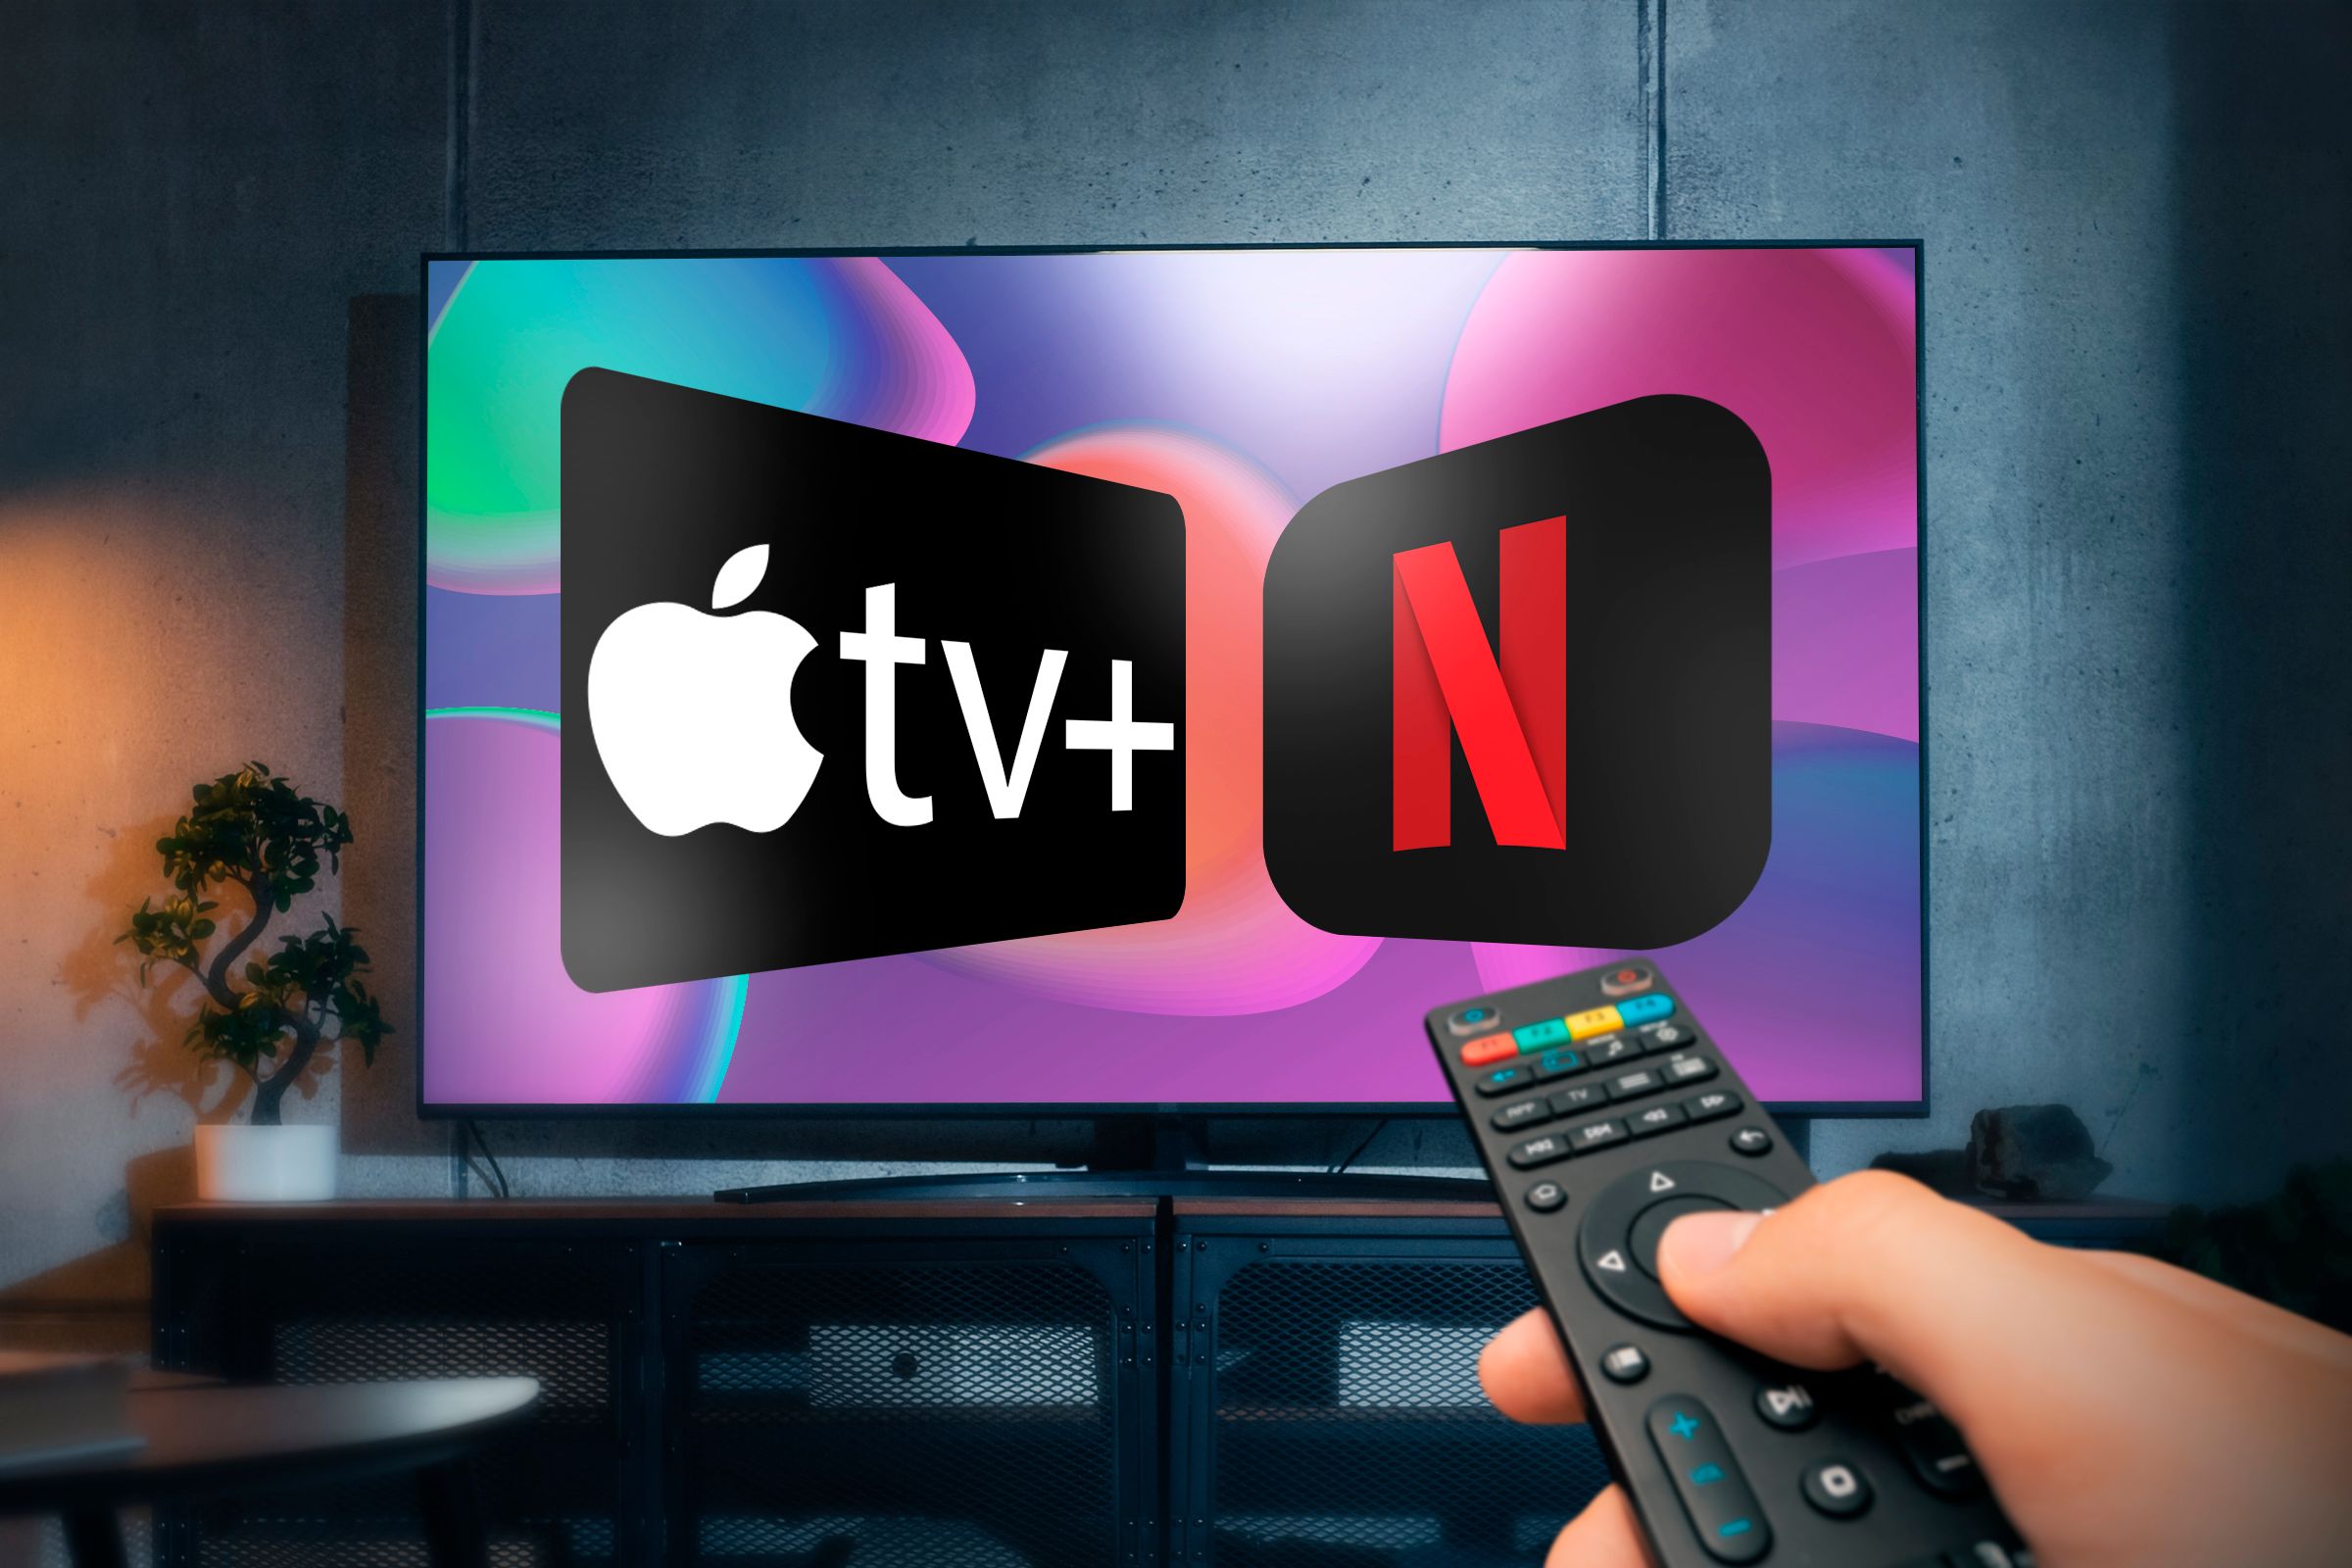 A TV with the Apple TV+ and Netflix logos on the screen with a hand holding a remote control on the right side.